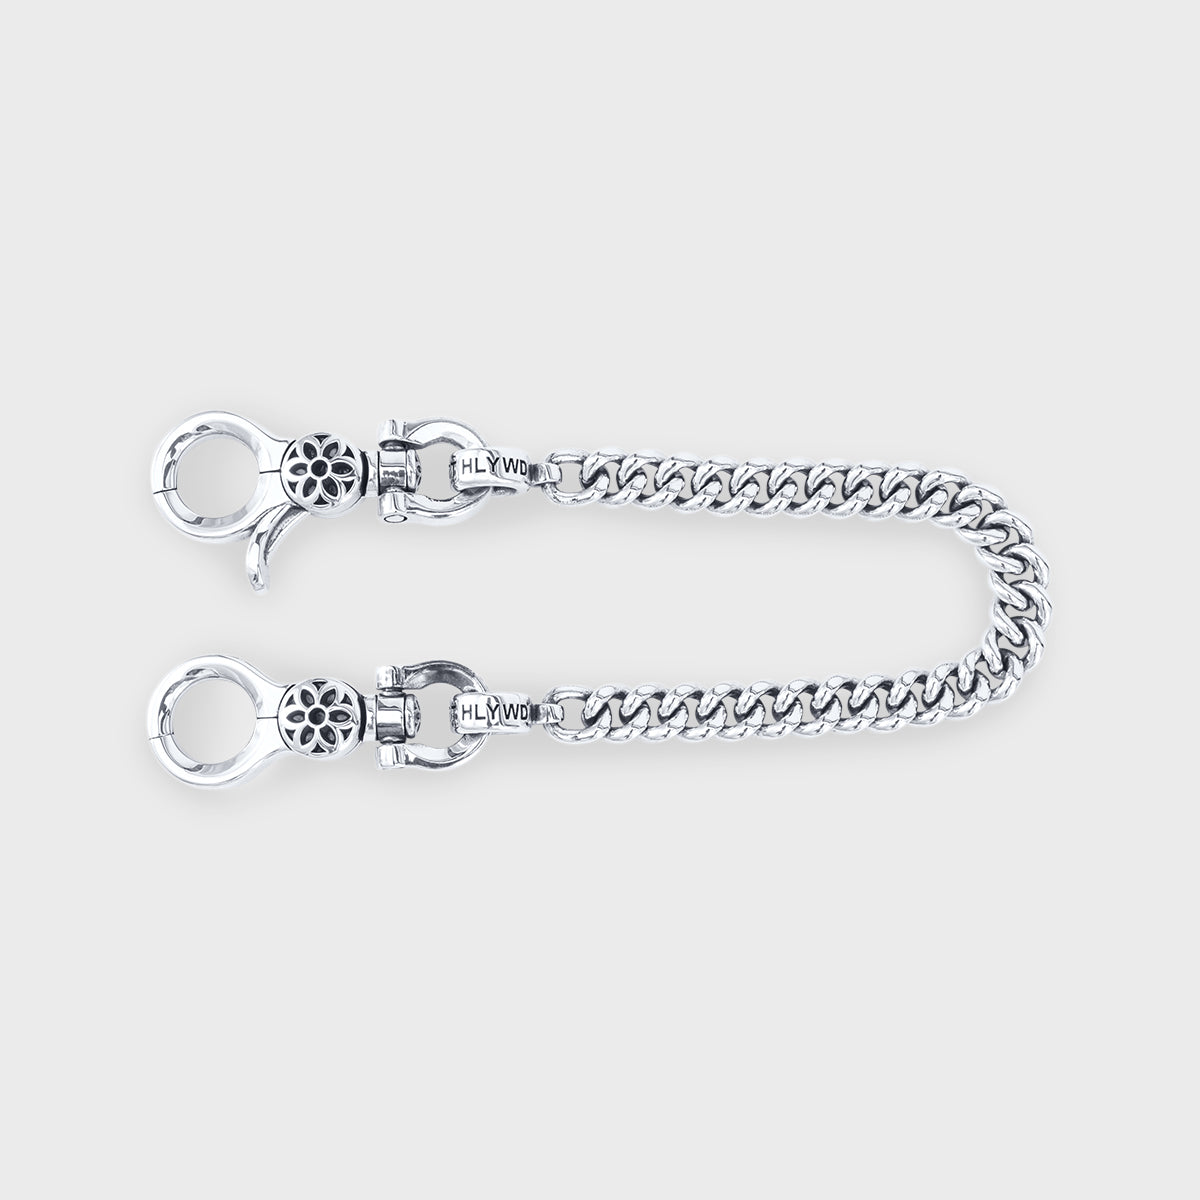 Silvertraits Thin Wallet Curb Chain Made of Sterling Silver